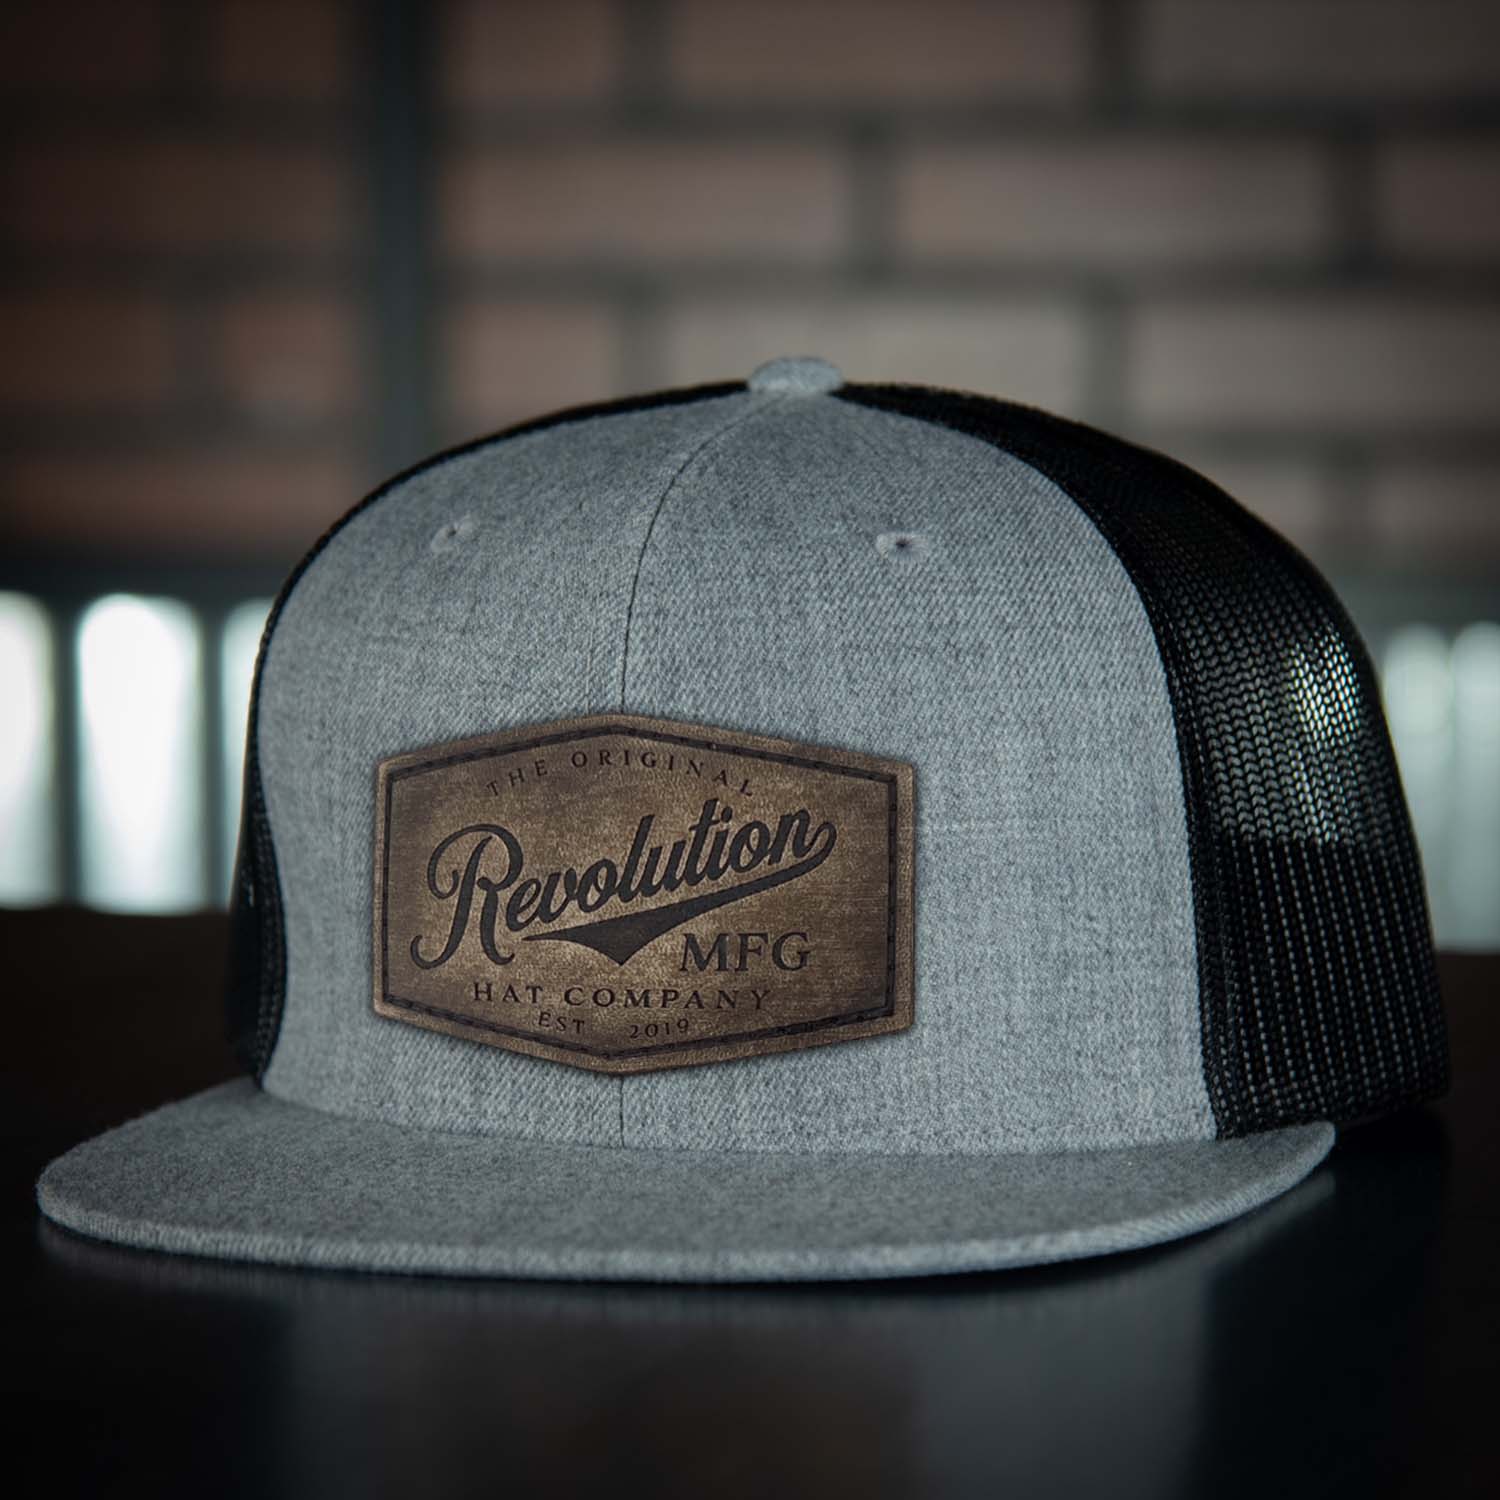 Revolution Hat Co Vintage full grain leather patch stitched on a heather gray and black 7 panel flat bill trucker hat